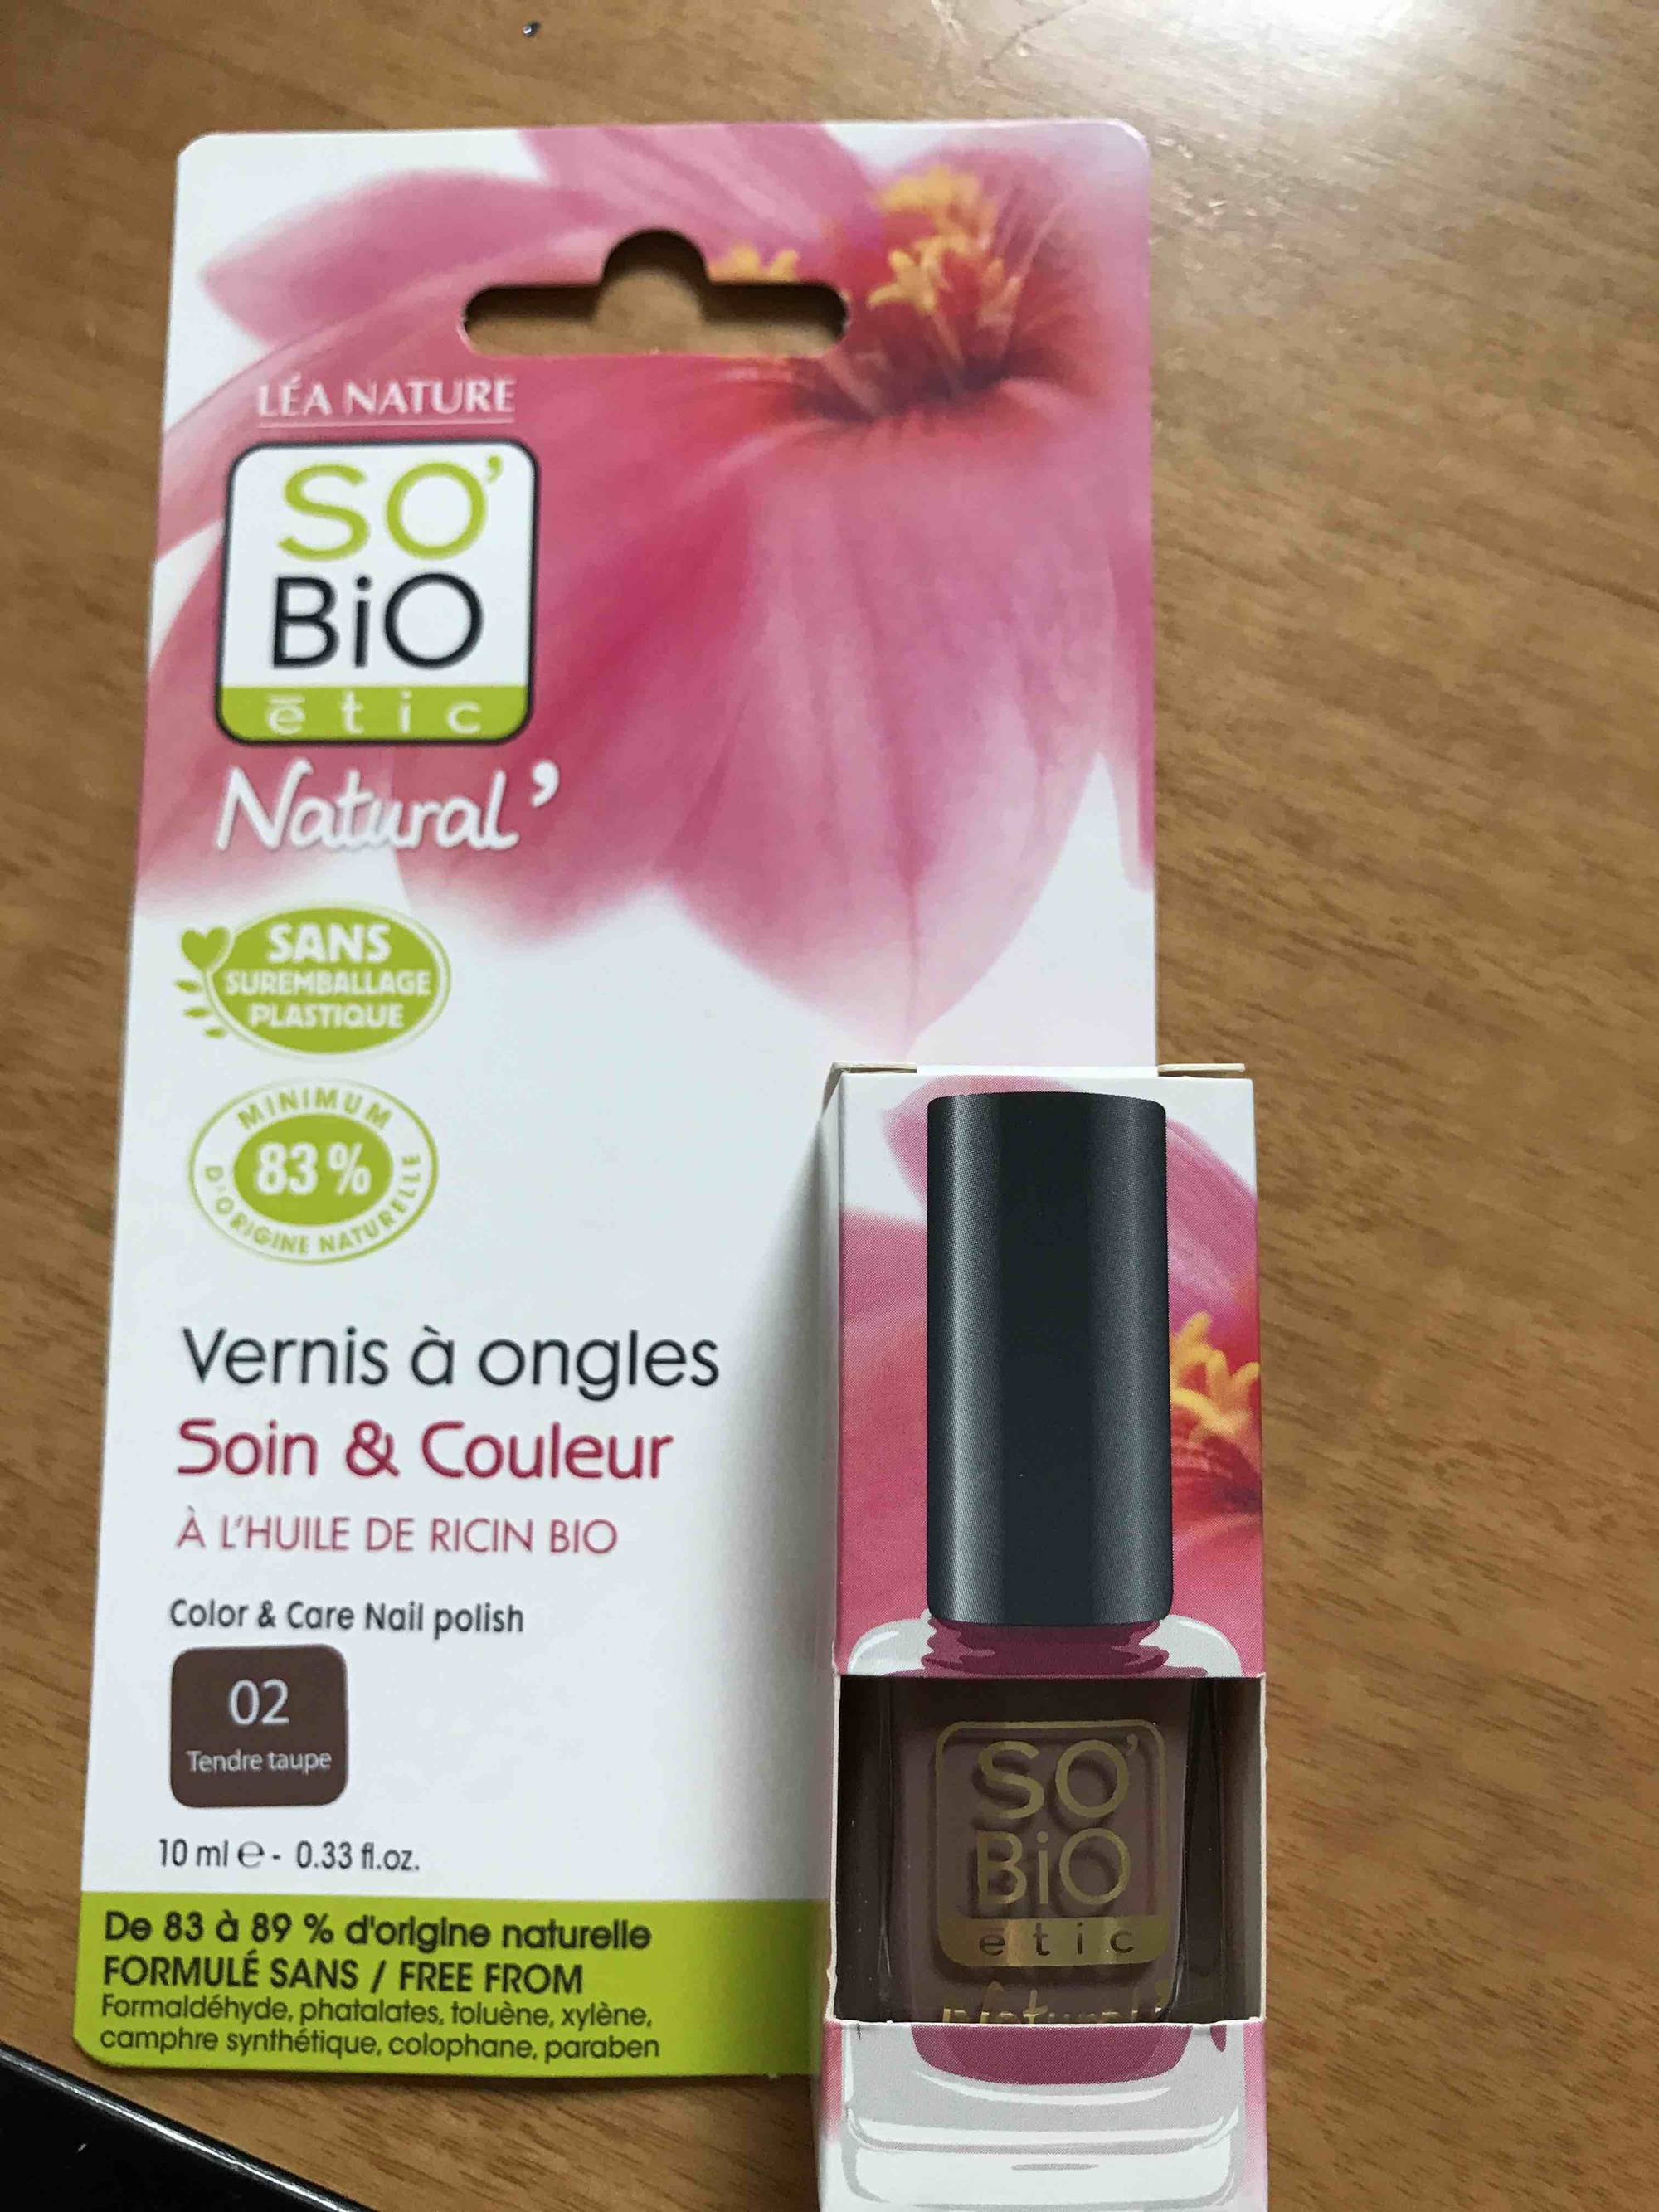 SO'BIO ÉTIC - Soin & couleur - Vernis à ongles  02 tendre taupe